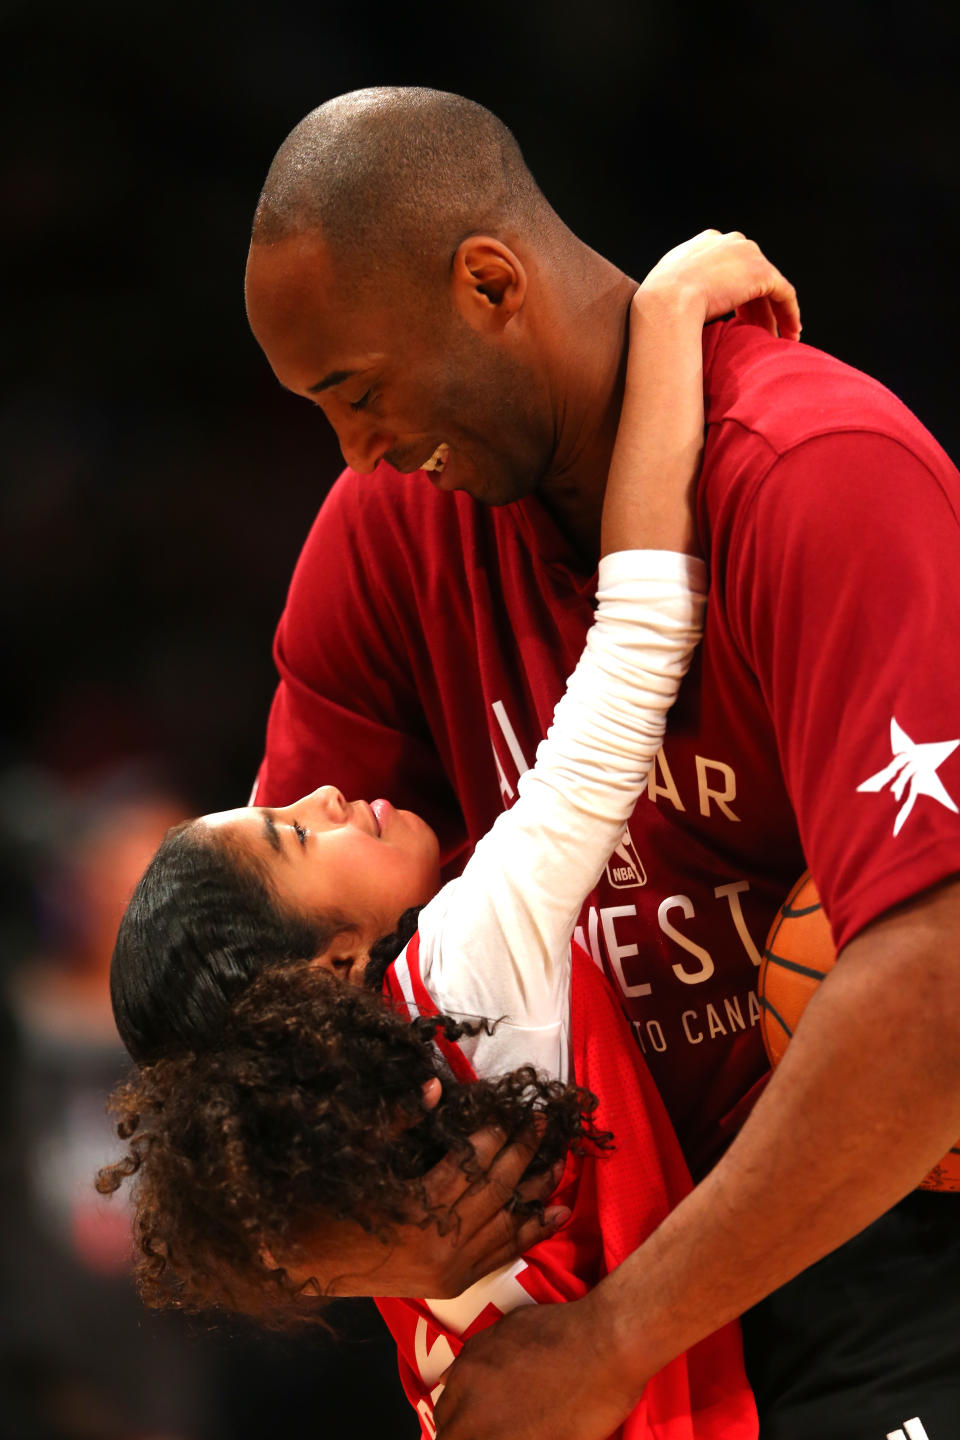 Kobe Bryant of the Los Angeles Lakers warms up with daughter Gianna Bryant during the NBA All-Star Game 2016 at the Air Canada Centre on Feb. 14, 2016, in Toronto, Ontario. (Photo by Elsa/Getty Images)